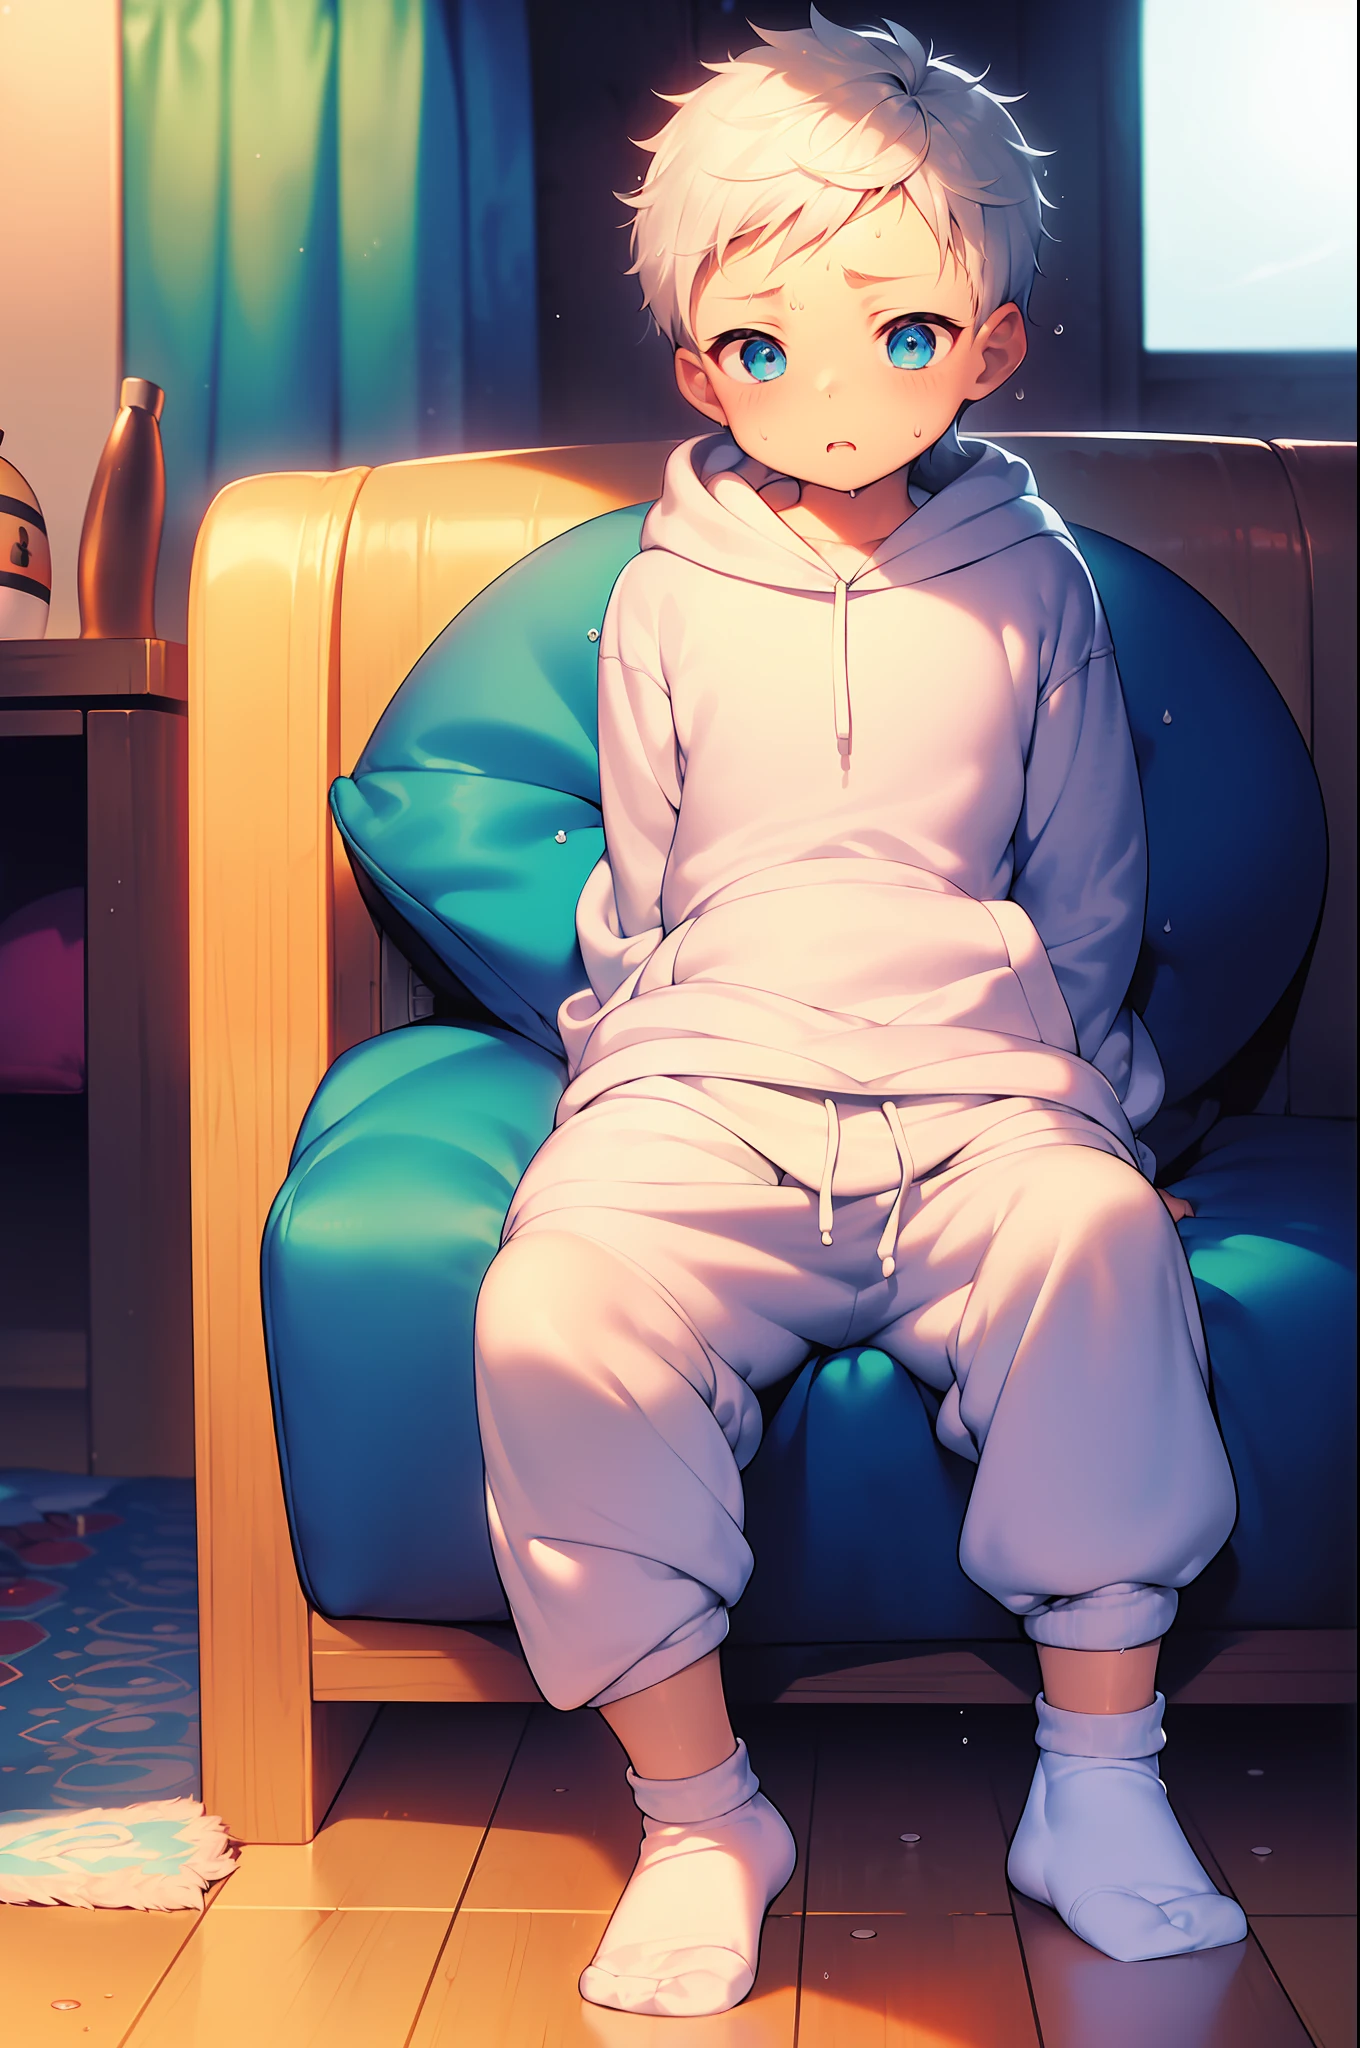 chubby Little boy with white hair and shiny blue eyes and colorful socks wearing a hoodie, and oversized sweatpants sitting on a couch, blushing, drooling, young, boy, , small, toddler, soft light, (sweatpants:1.8), (socks:1.4), (little boy:1.4), (shota:1.4), (cute:1.4), (small:1.6), (undersized socks:1.4), (hoodie:1.6)